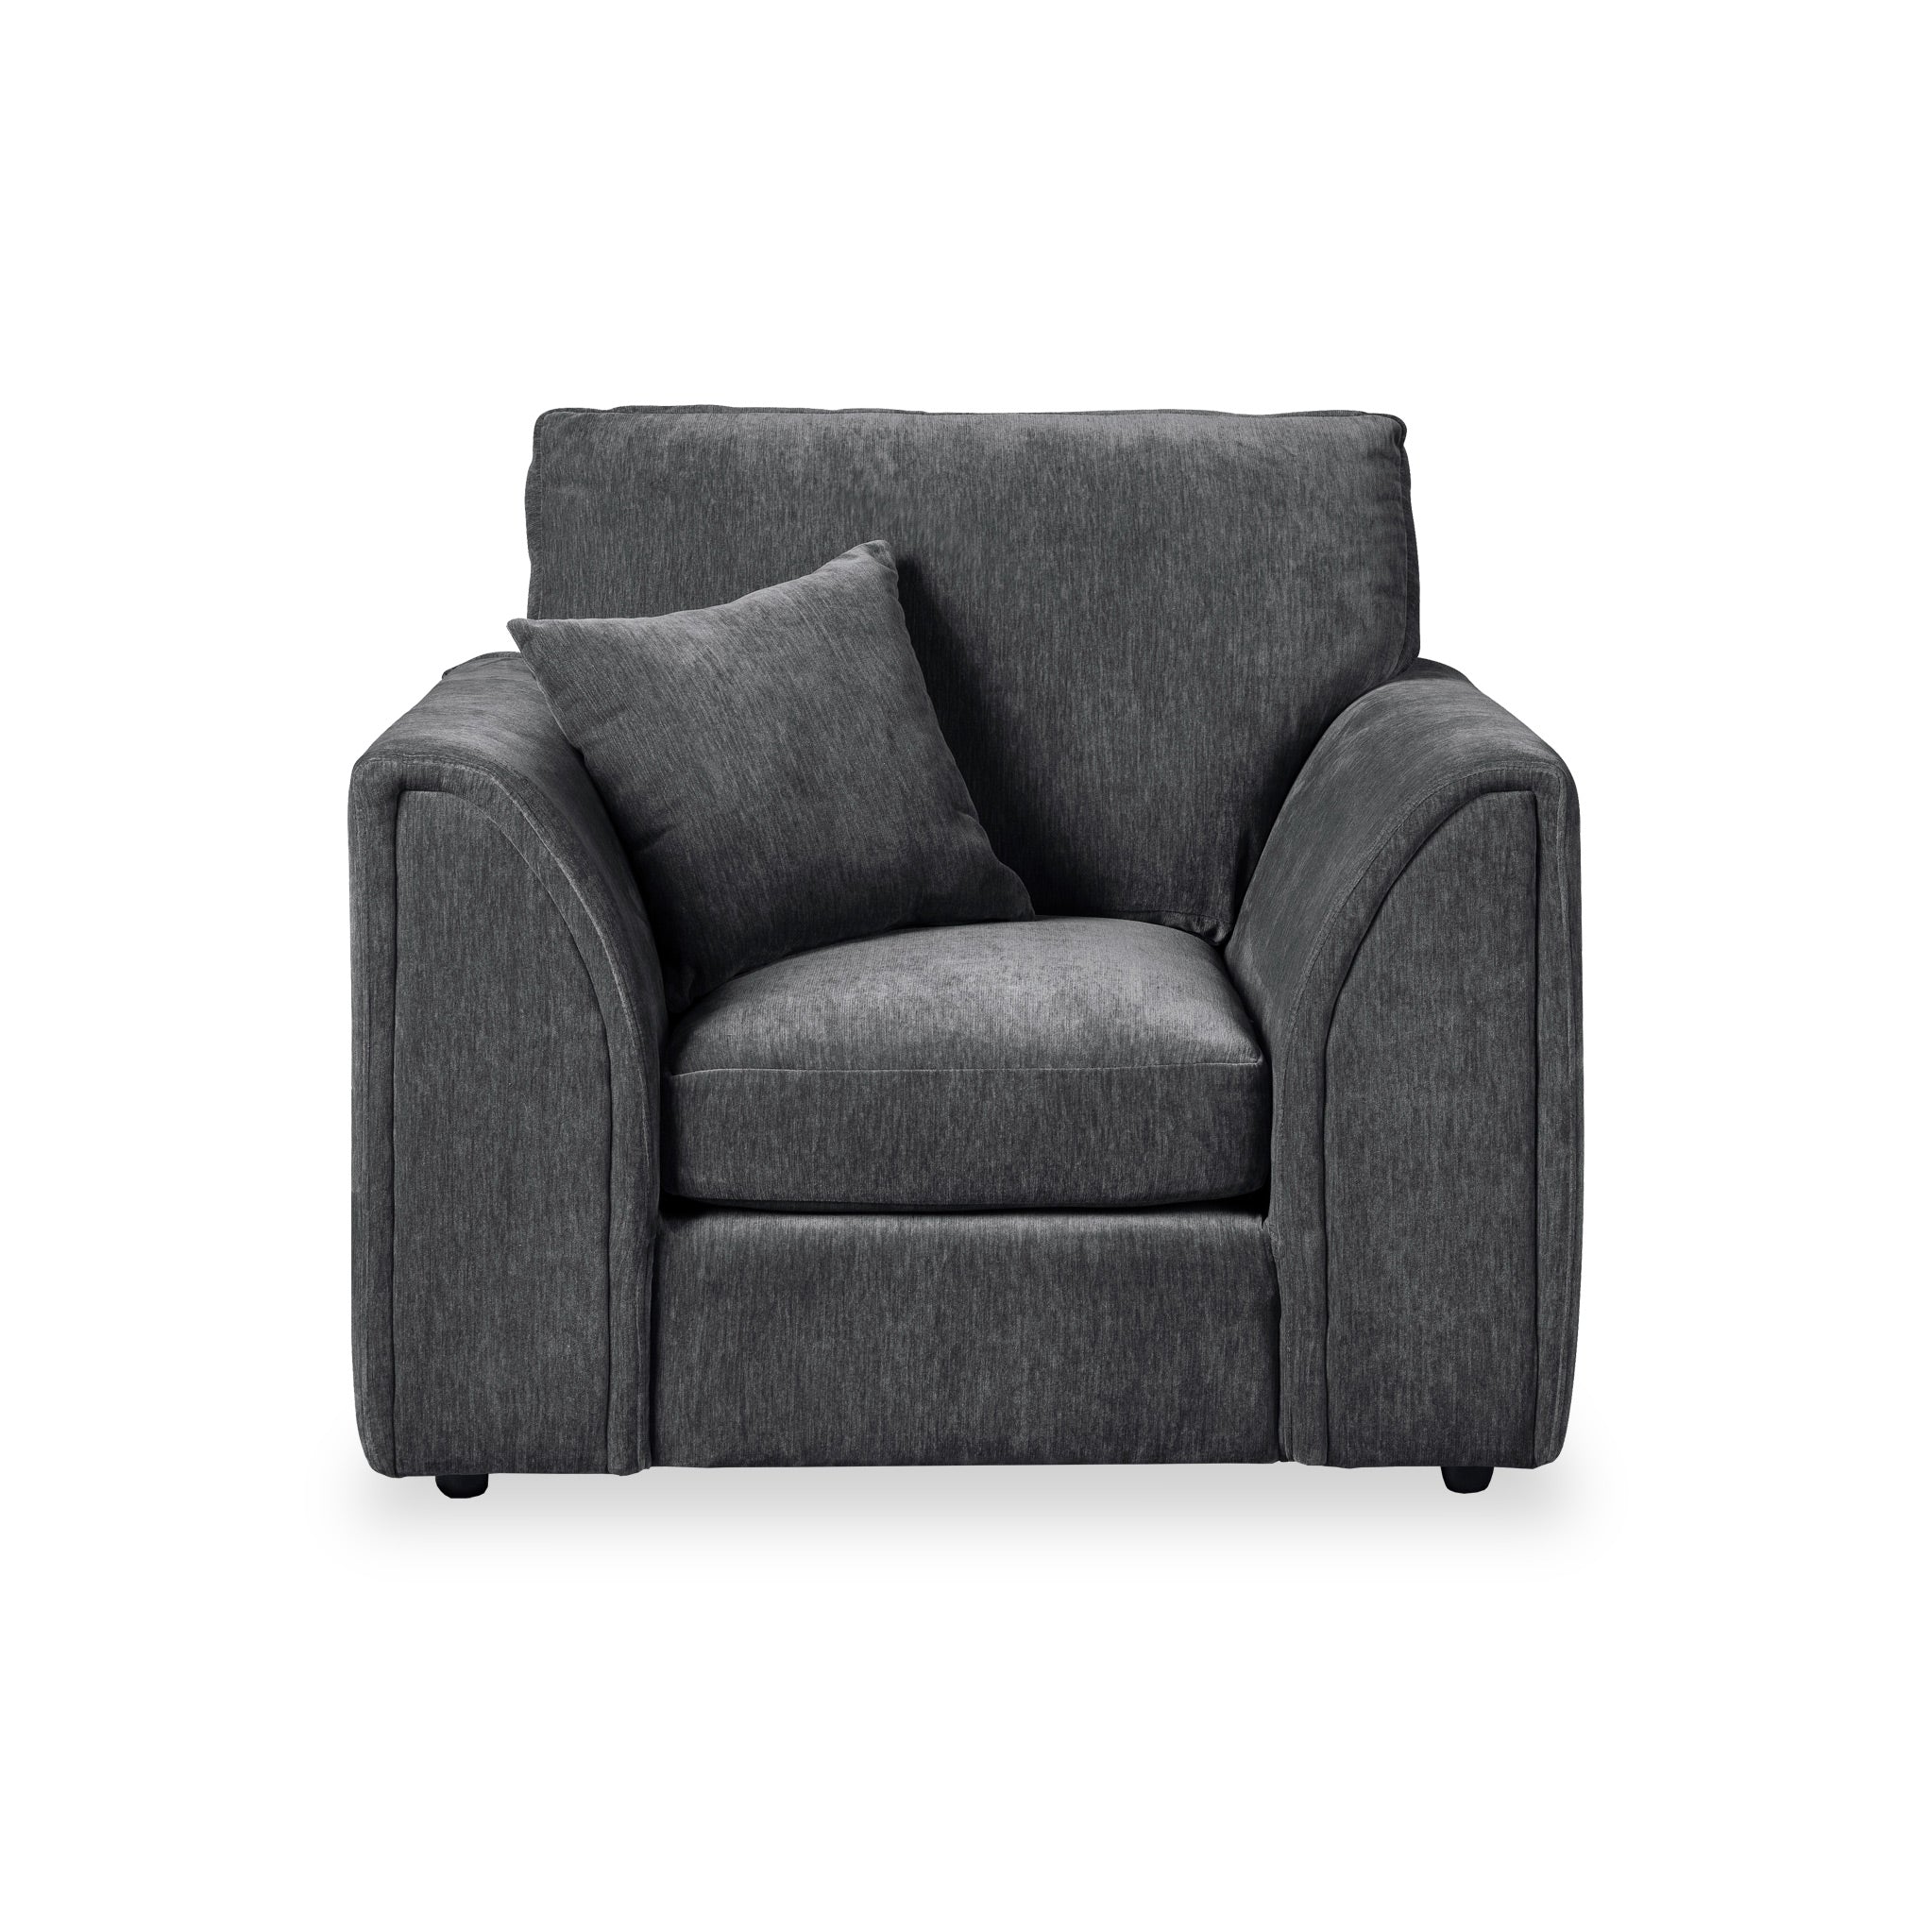 Dunford Chenille Armchair Navy Charcoal Mink Fabric Living Room Chair